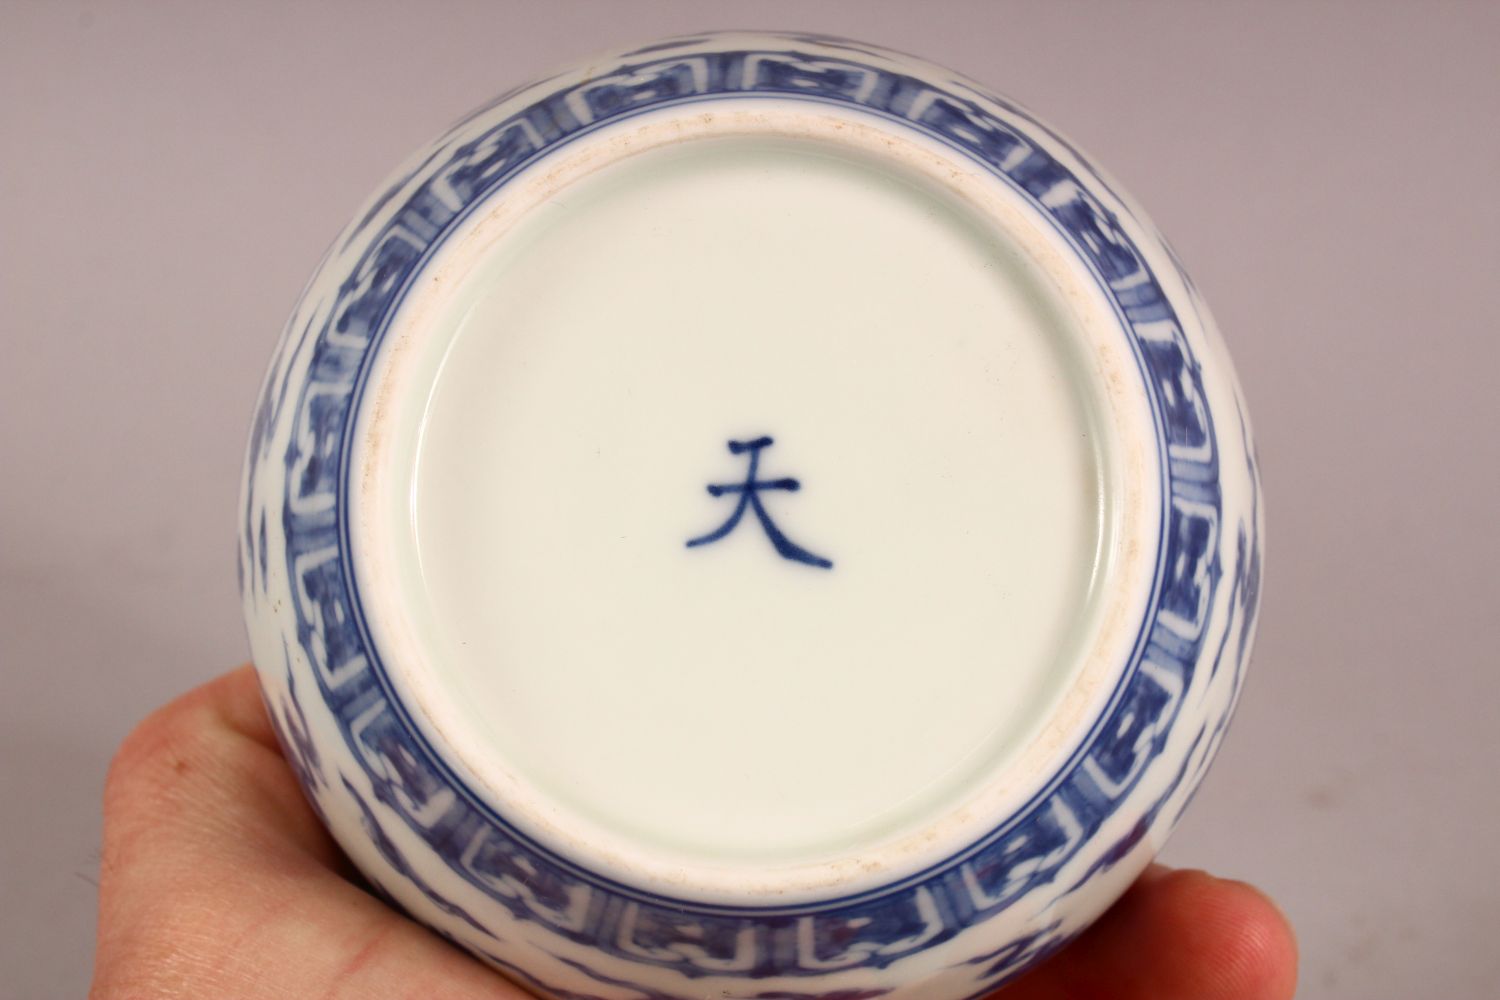 A CHINESE BLUE & WHITE PORCELAIN JAR & COVER, with decoration of kylin and clouds, base with a mark, - Image 7 of 7